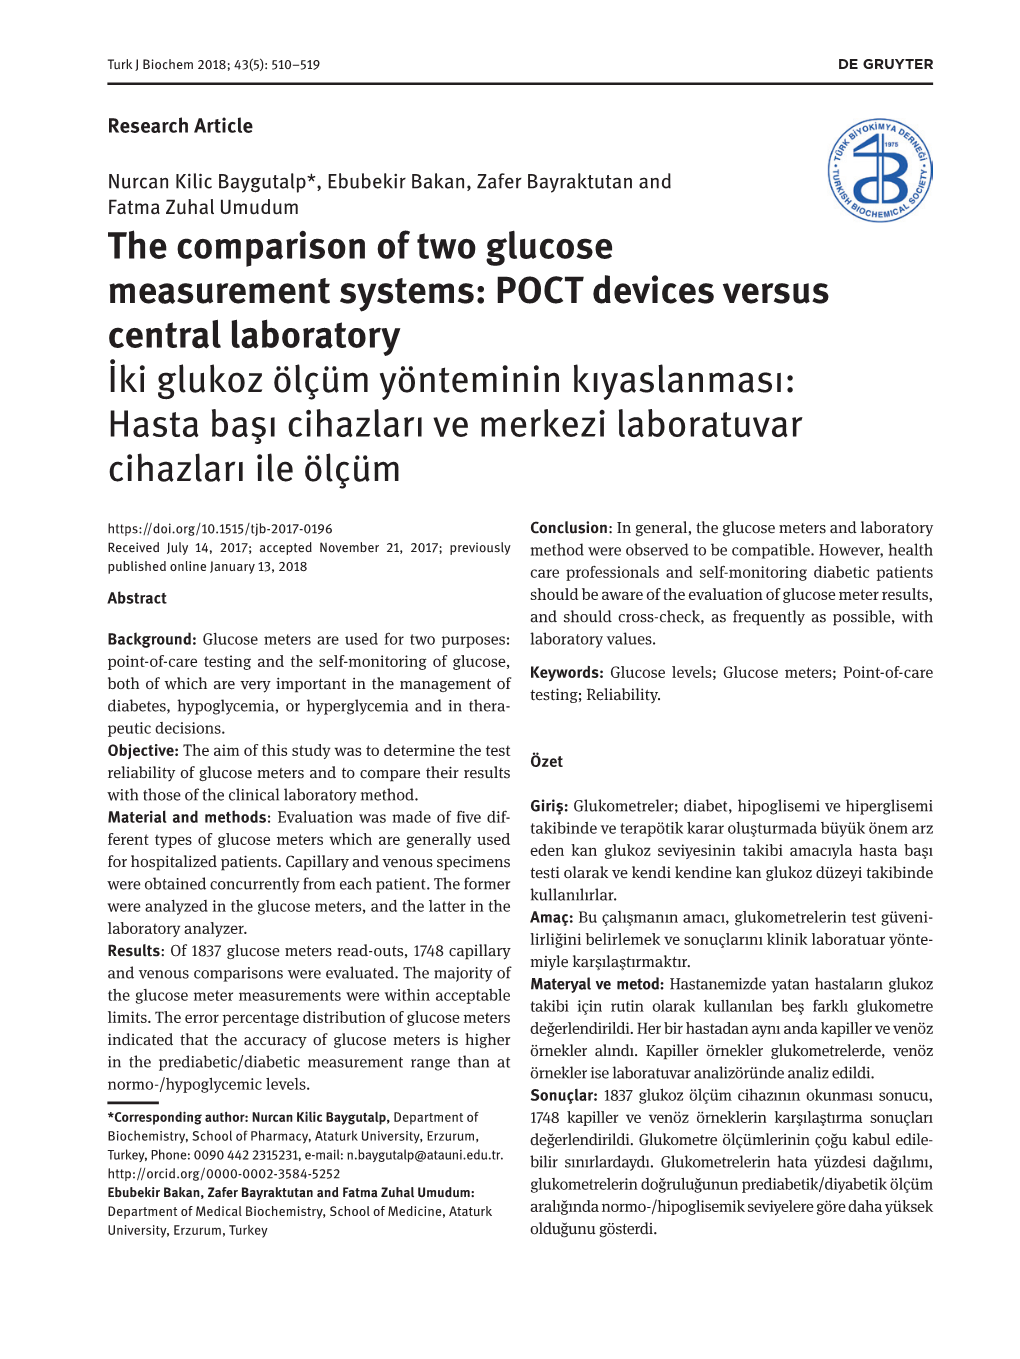 The Comparison of Two Glucose Measurement Systems